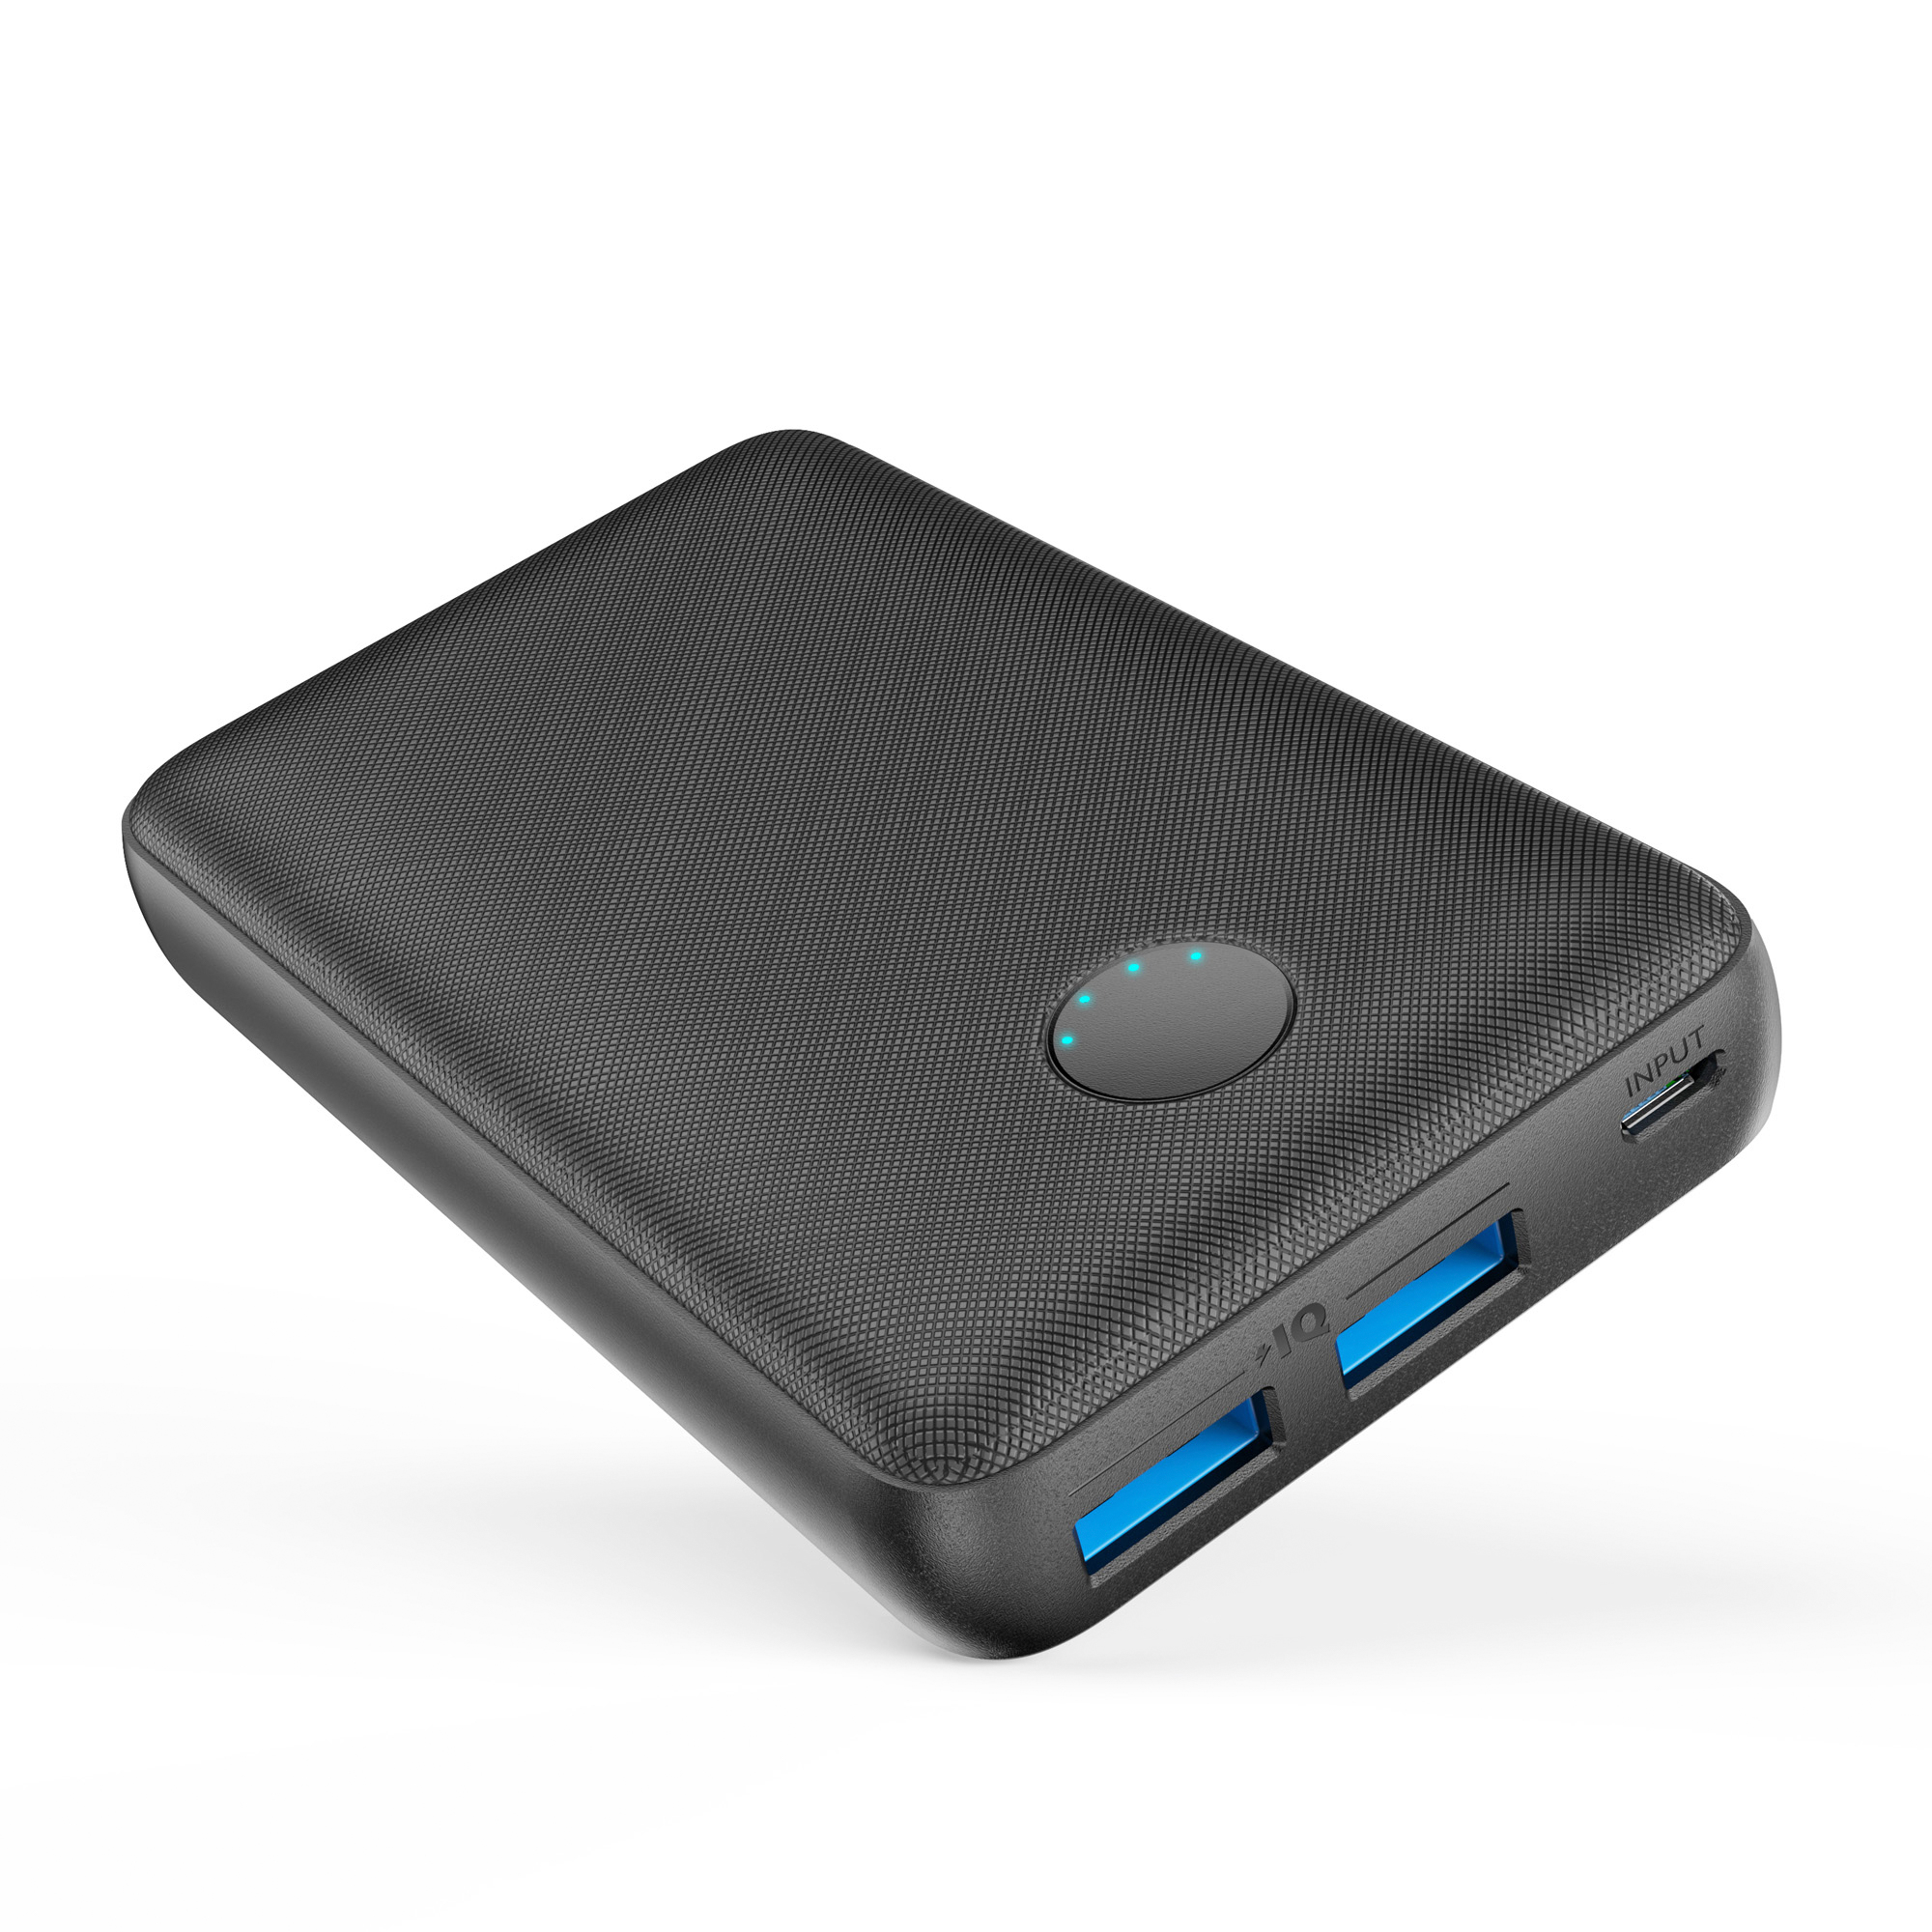 Anker PowerCore Select 10000 Portable Charger - Black, Ultra-Compact, High-Speed Charging Technology Phone Charger for iPhone, Samsung and More. - image 2 of 6